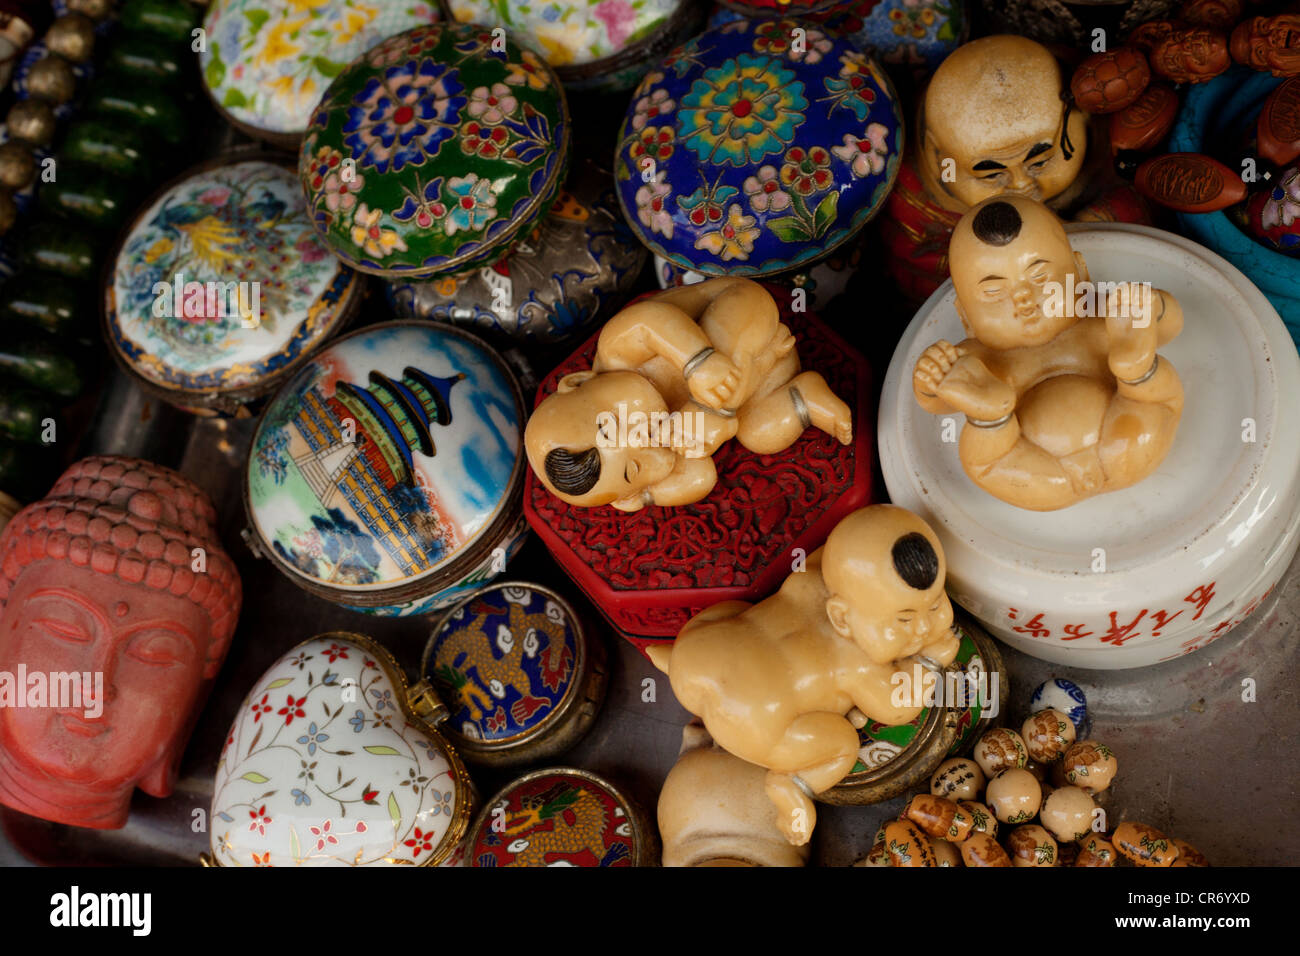 Old chinese culture Items sold in street stalls of China shanghai. Stock Photo